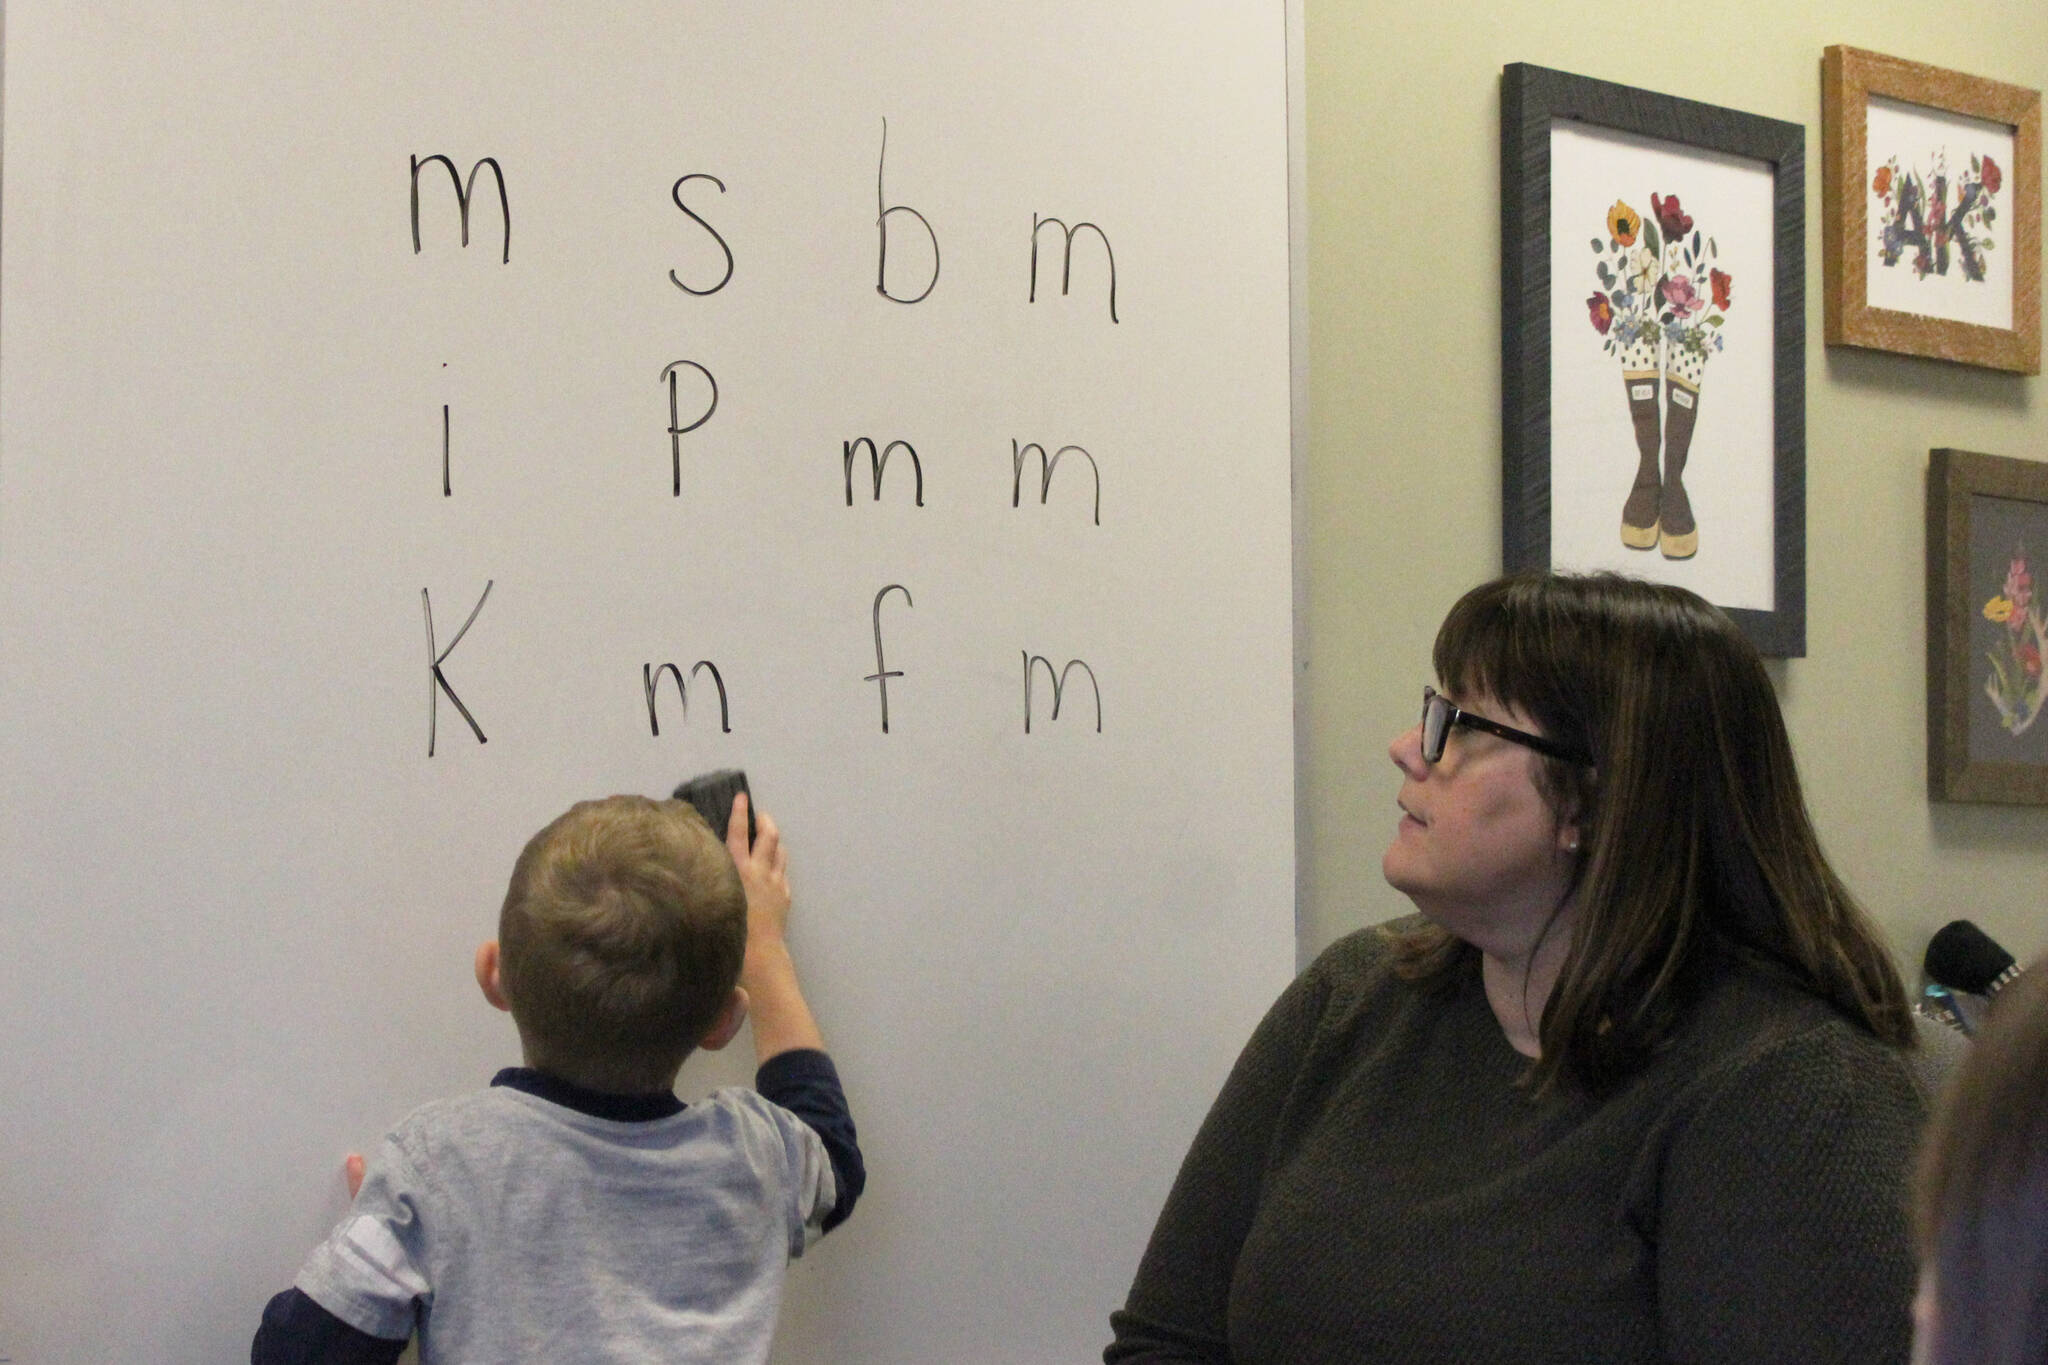 Students practice finding the letter “M” during a group activity led by Mountain View Elementary School Interventionist Katie Schneider on Thursday, Oct. 19, 2023, in Kenai, Alaska. (Ashlyn O’Hara/Peninsula Clarion)